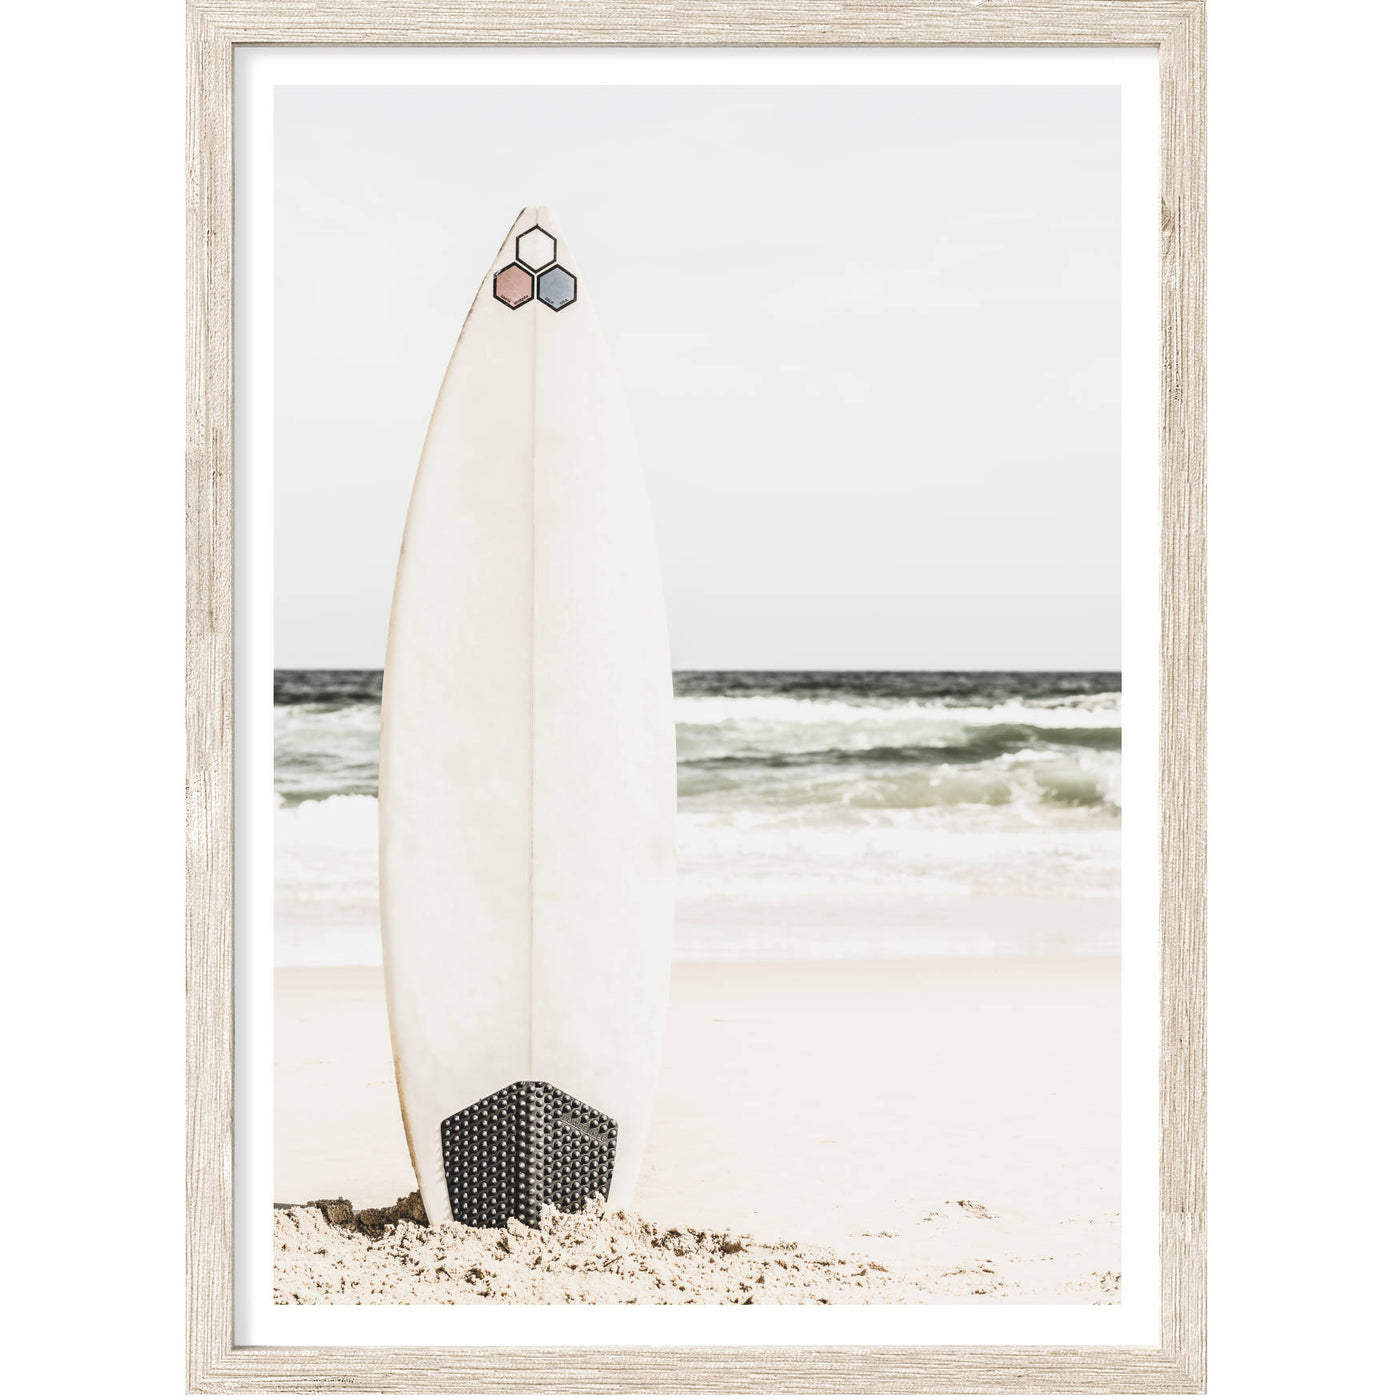 A Surfboard on the Beach - Set of 2